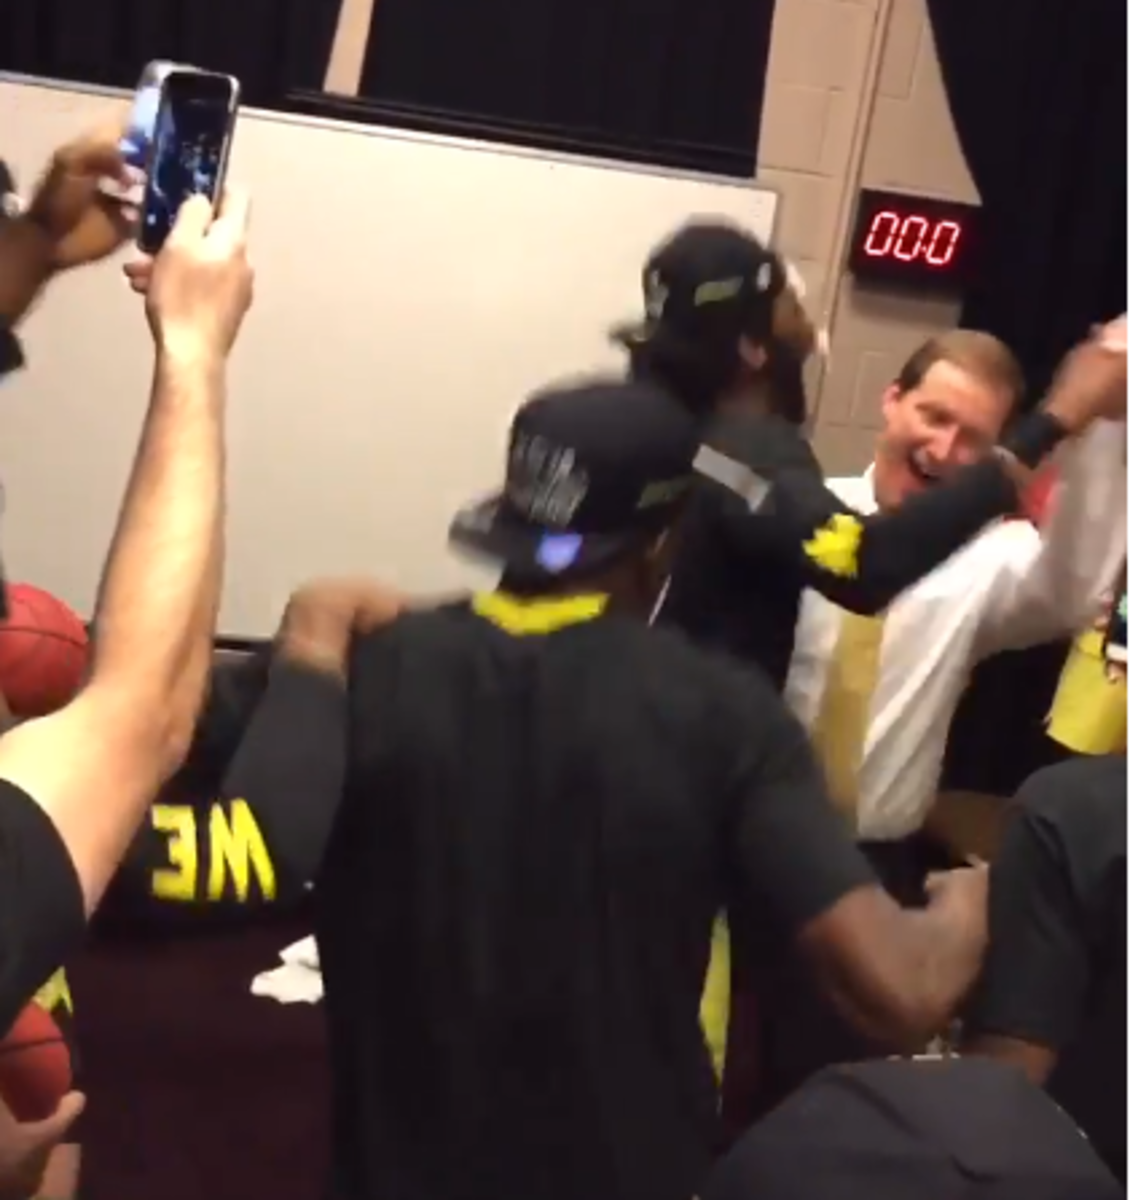 Oregon players and coaches celebrate in the locker room after PAC 12 title.